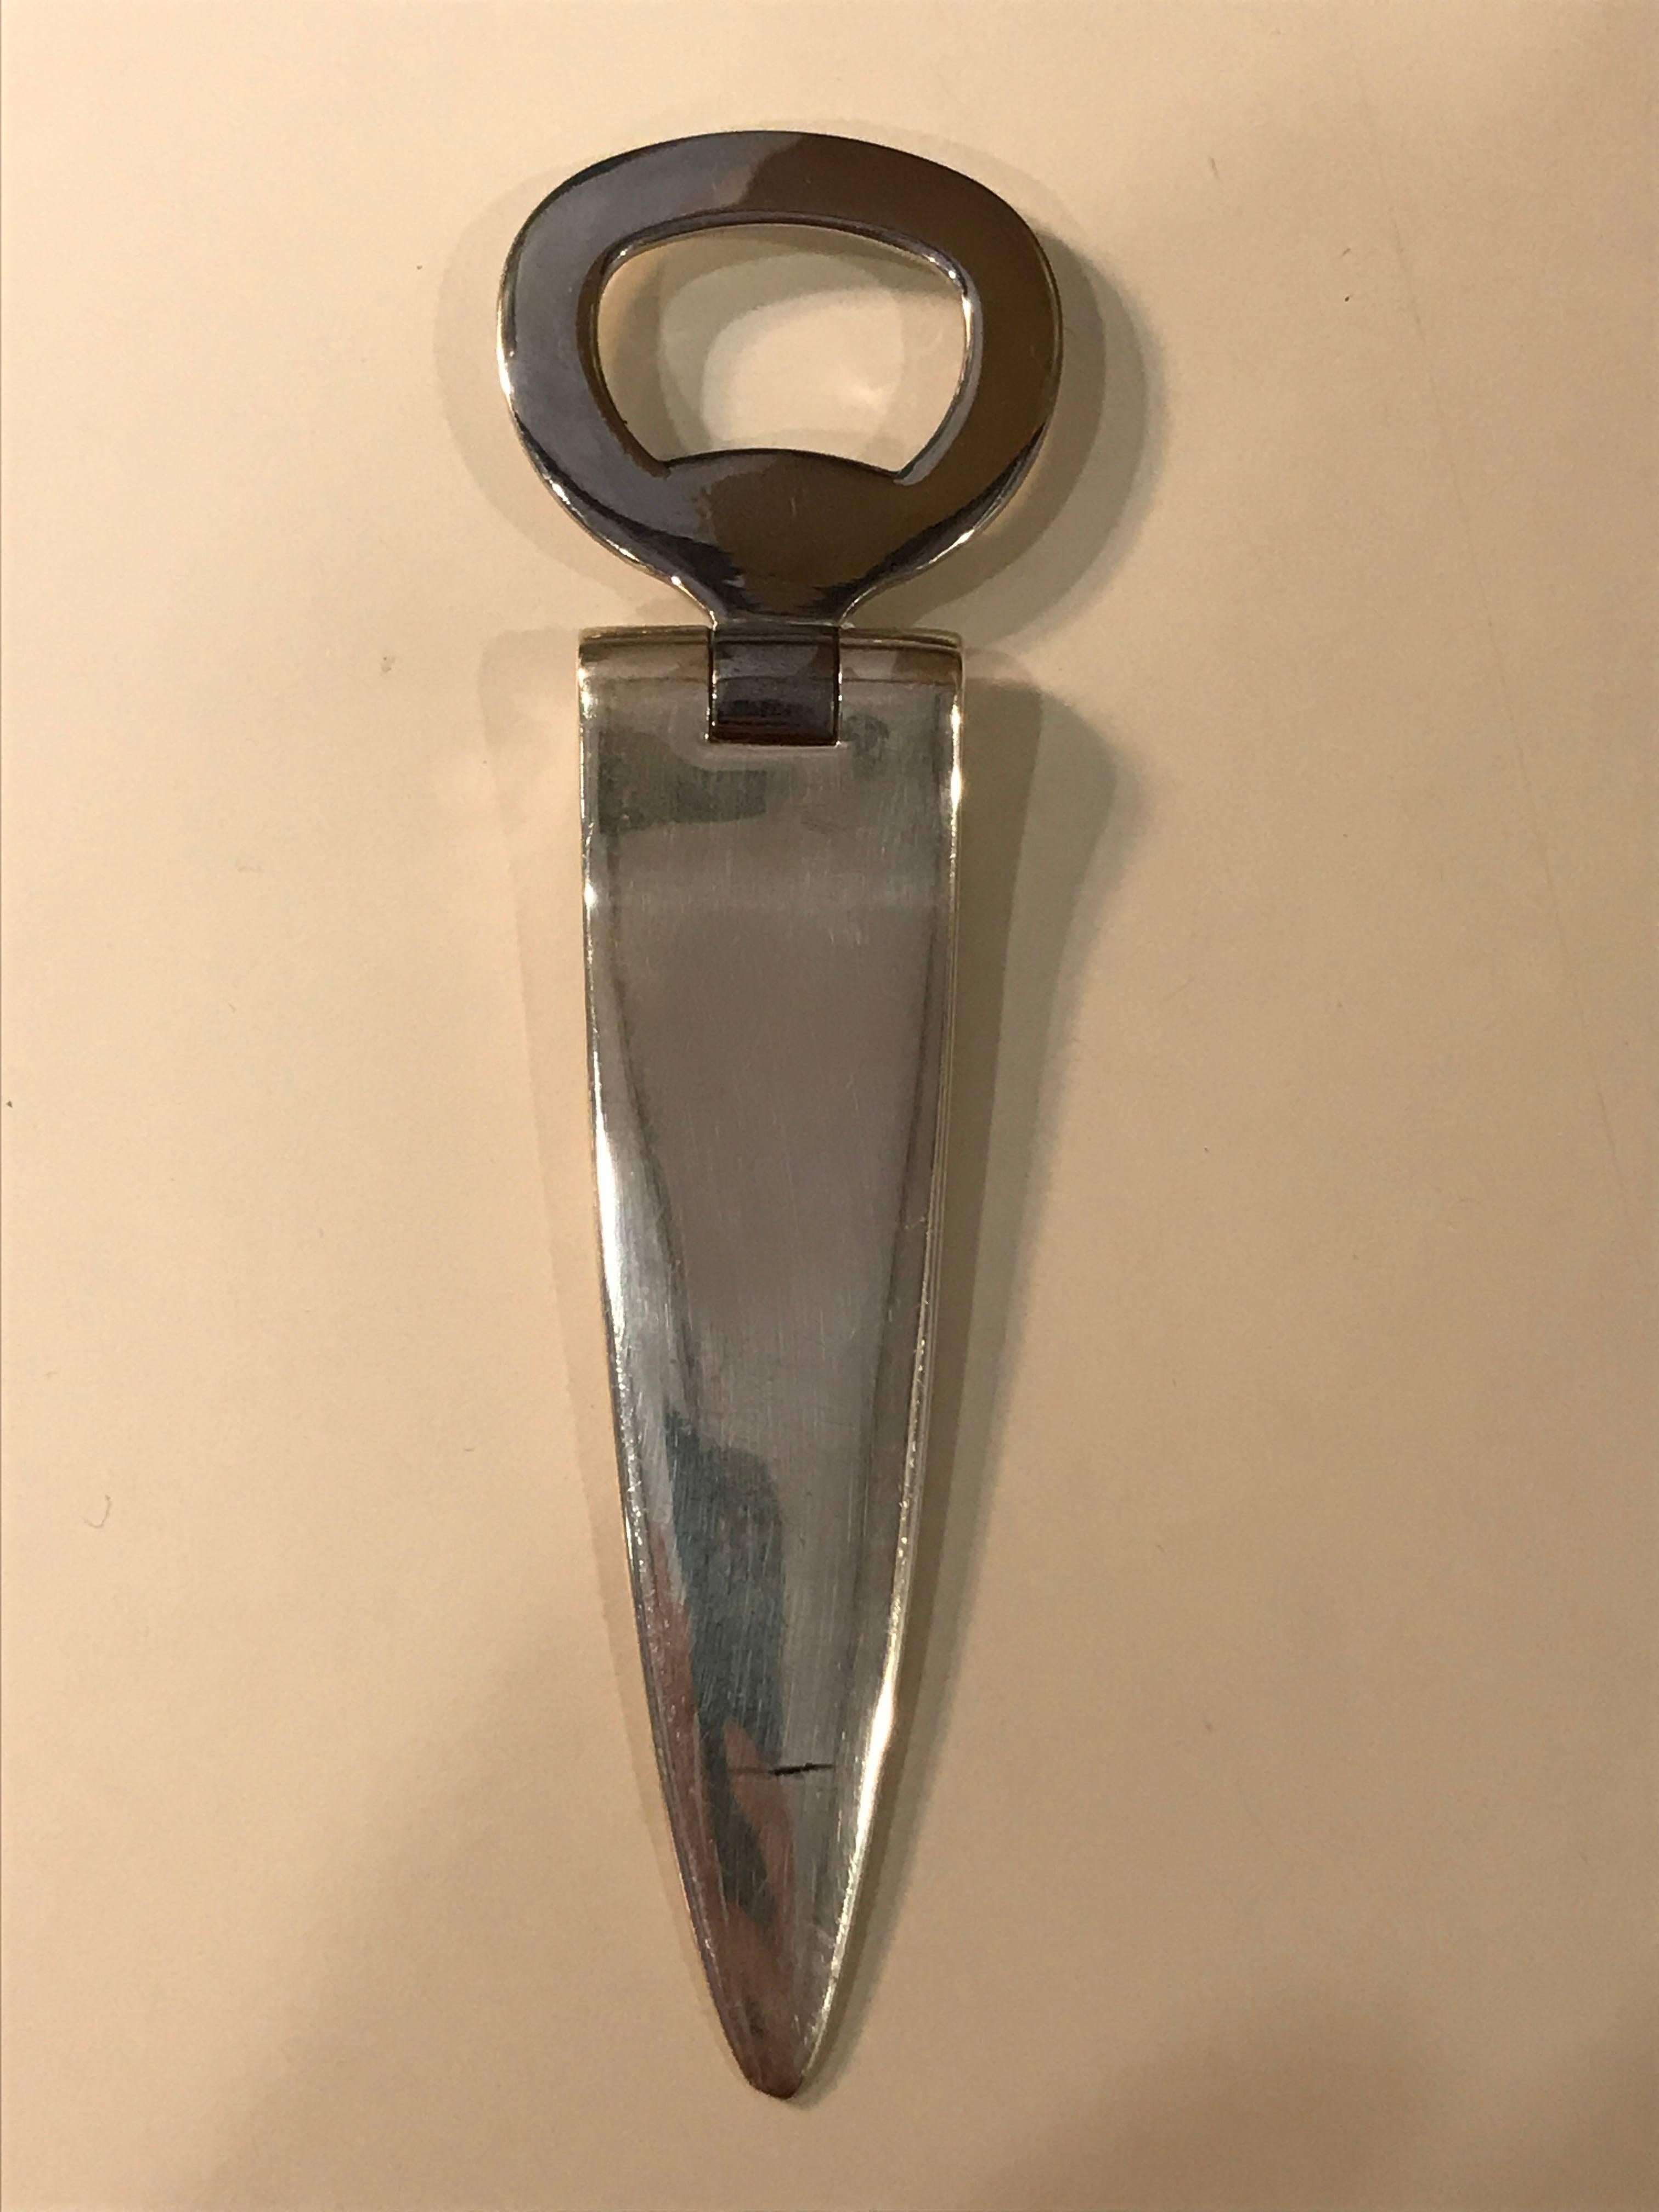 Bvlgari bottle opener
Sterling silver handle with a stainless top head.
 